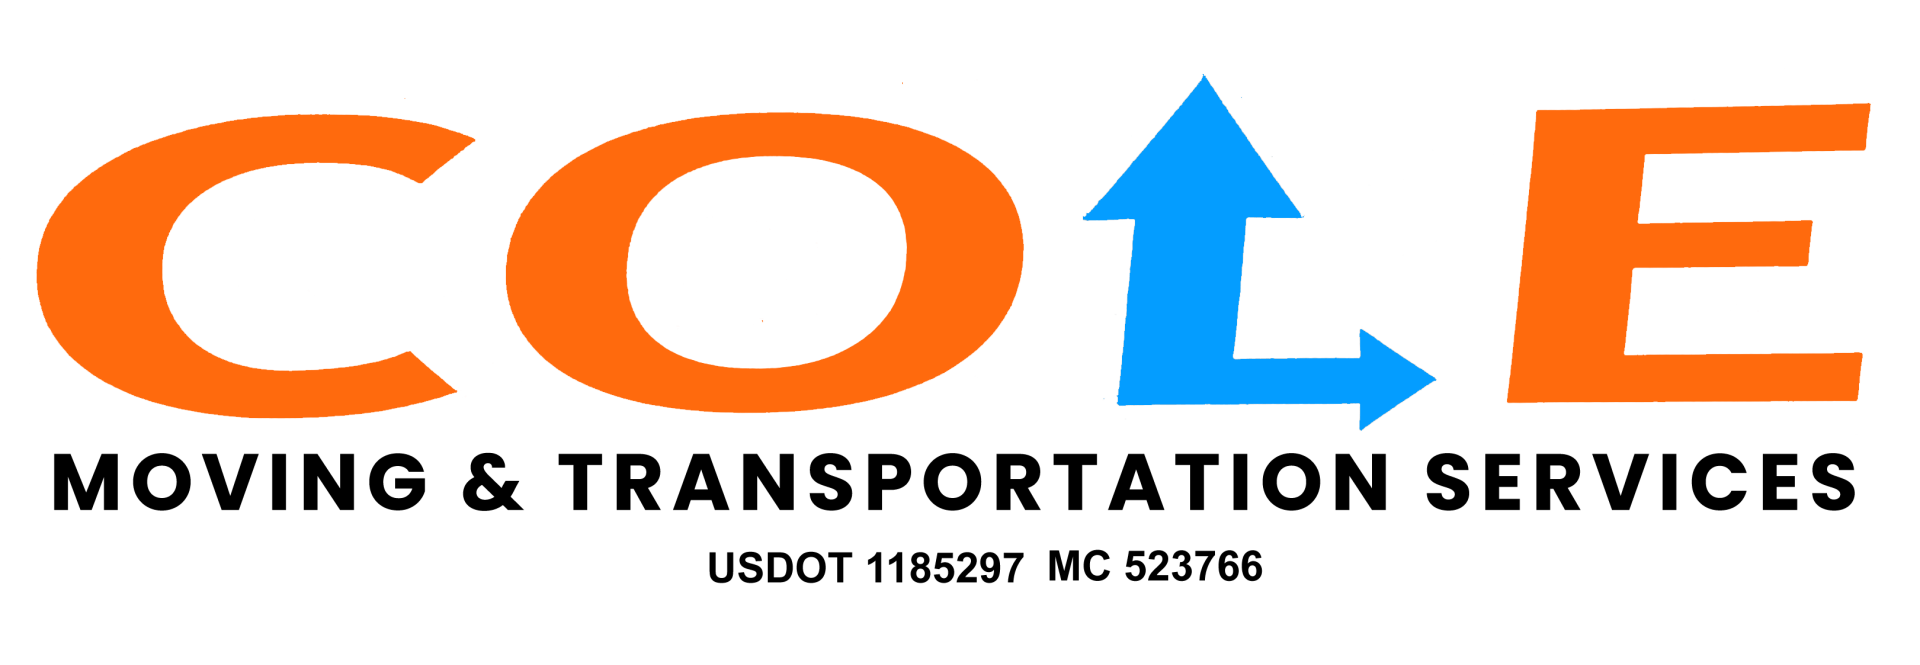 Cole Moving and Transportation Services